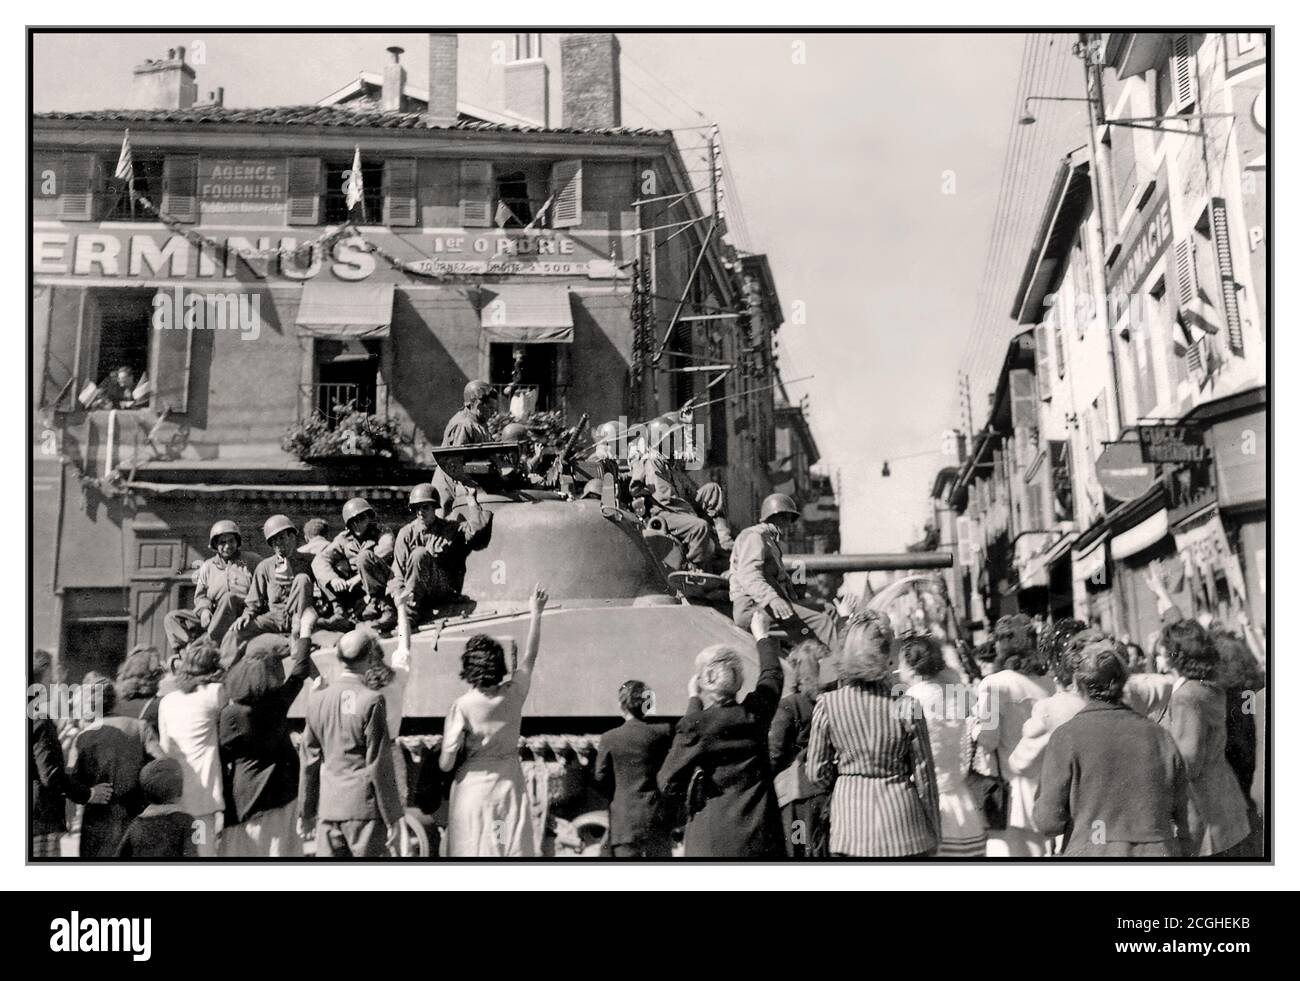 WW2 France Liberation in a provincial French town, after D-Day with the rapidly advancing American 45th Infantry Division. Local villagers wave and happily crowd around their US Army liberators who are sitting on their American tank enjoying the enthusiastic welcome. September 1944. World War II Second World War Stock Photo